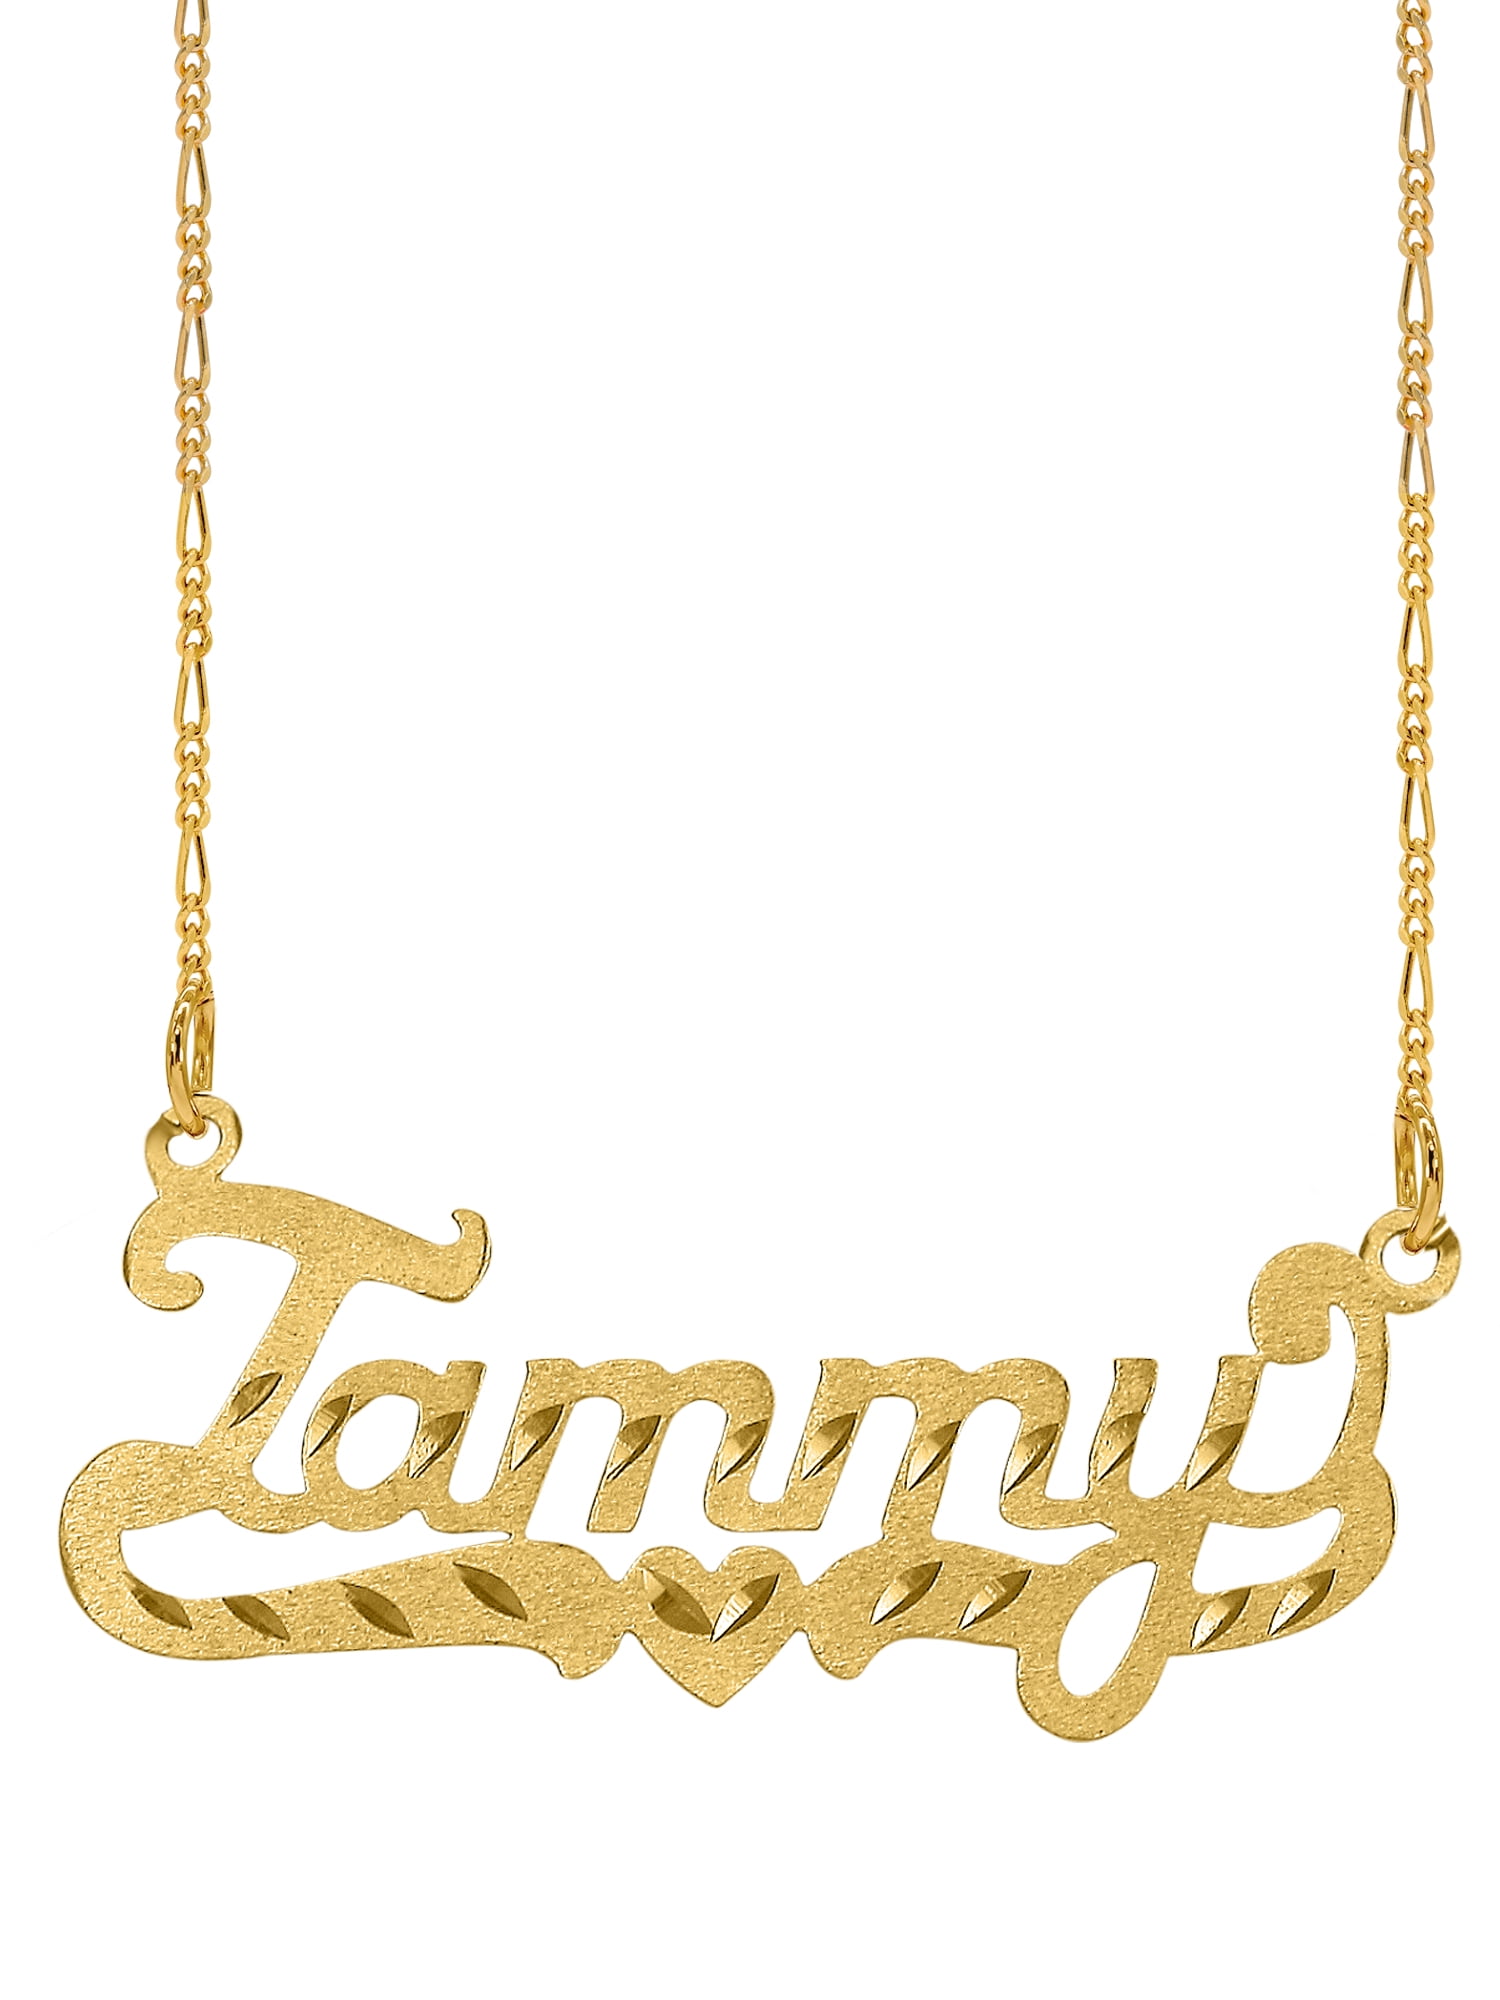 Personalized Name Rolo Chain Customizable SCRIPT MT BLOOD Font Stainless Steel Name Necklace DIY Nameplate Jewellery With Gift Box Amy, Anna, Tina, Victoria and so on, 43 Names Common Names